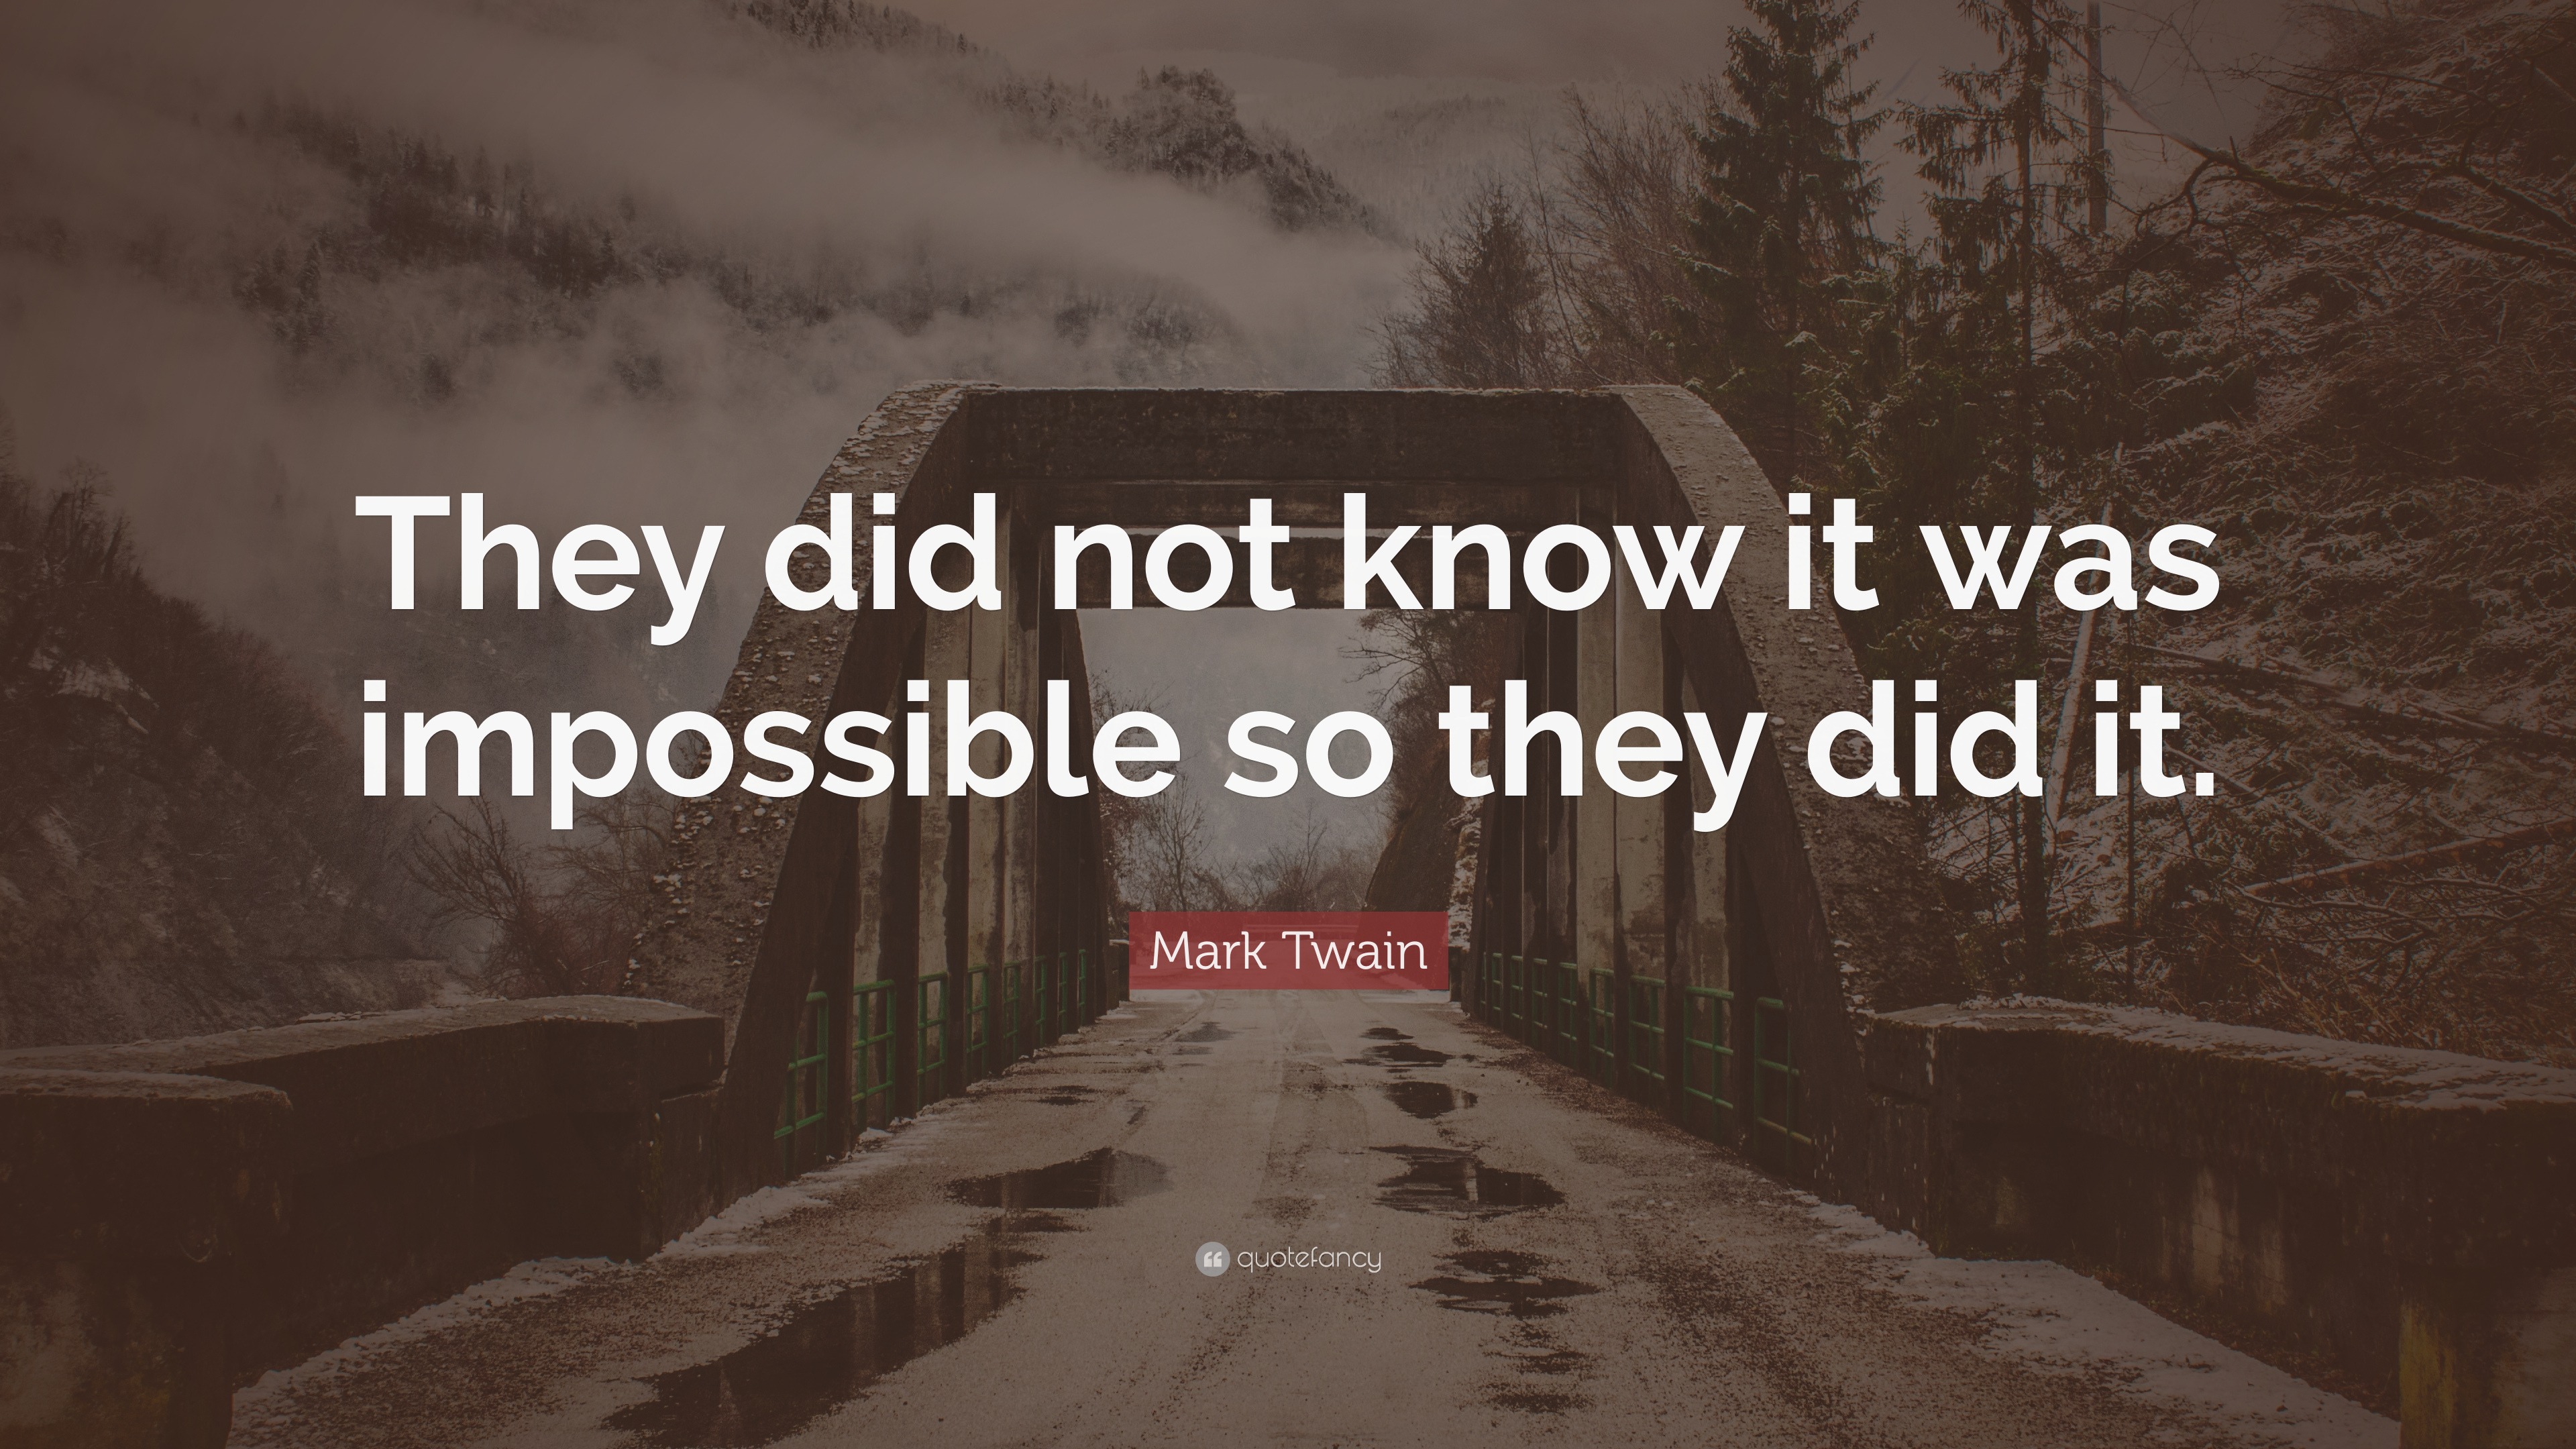 Mark Twain Quote They Did Not Know It Was Impossible So They Did It 12 Wallpapers Quotefancy